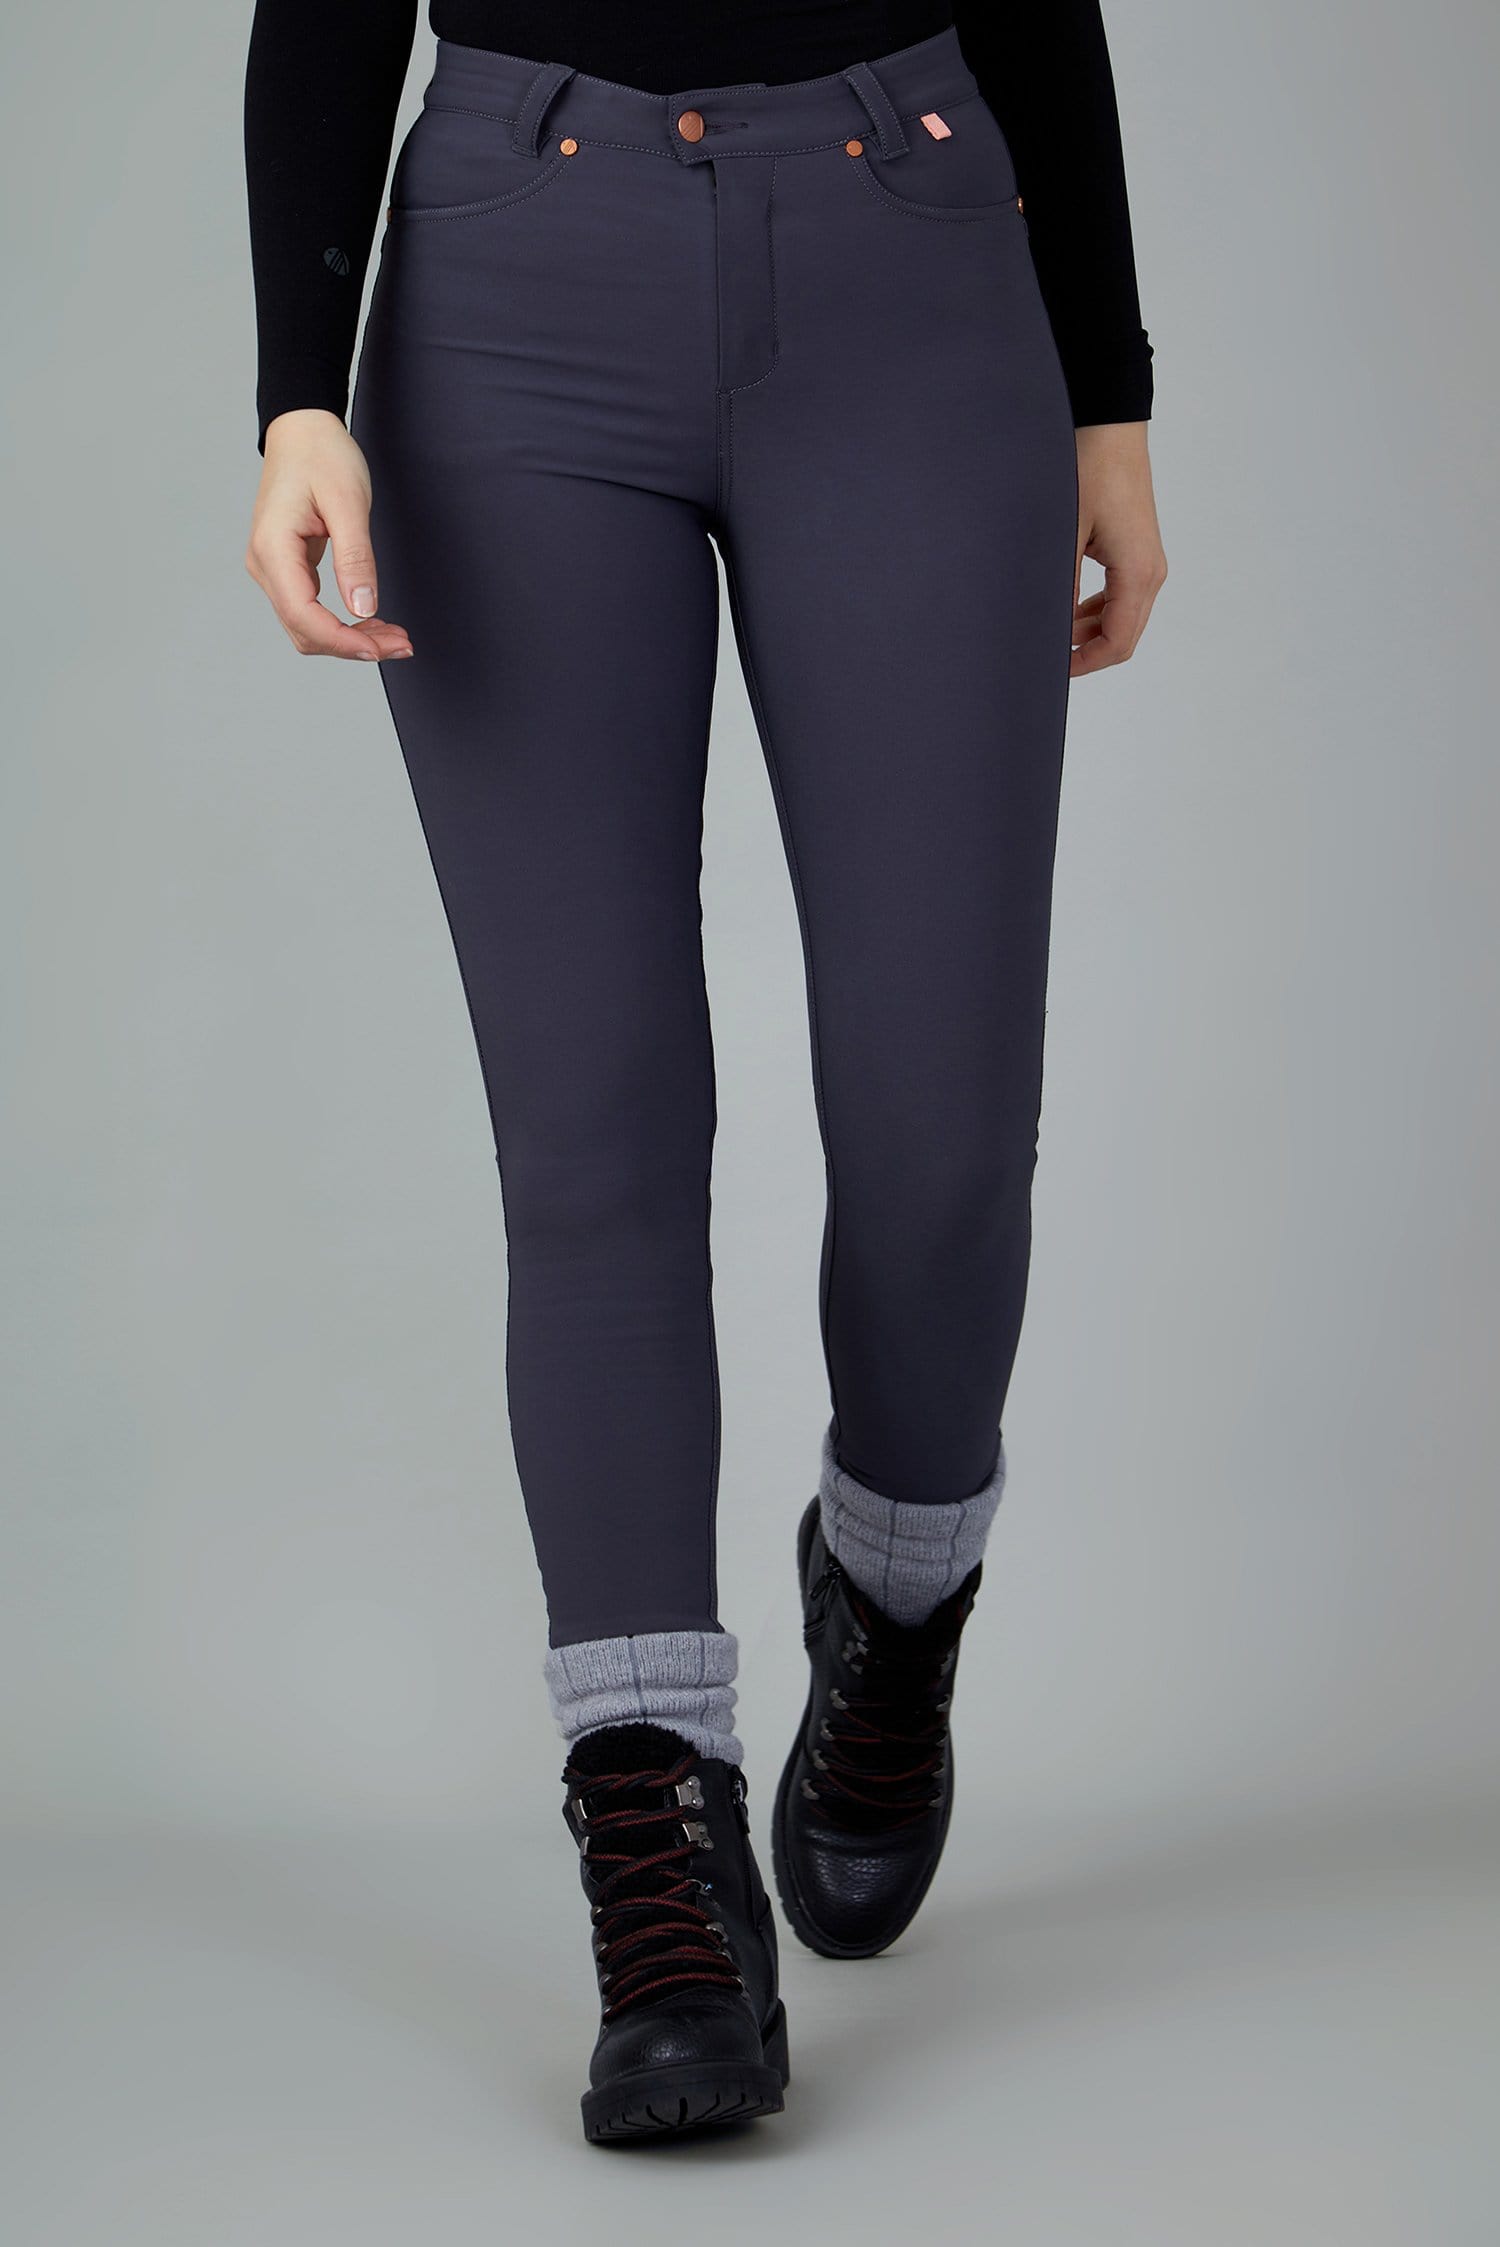 The Aventurite Stretch Skinny Outdoor Trousers - Obsidian - 34l / Uk16 - Womens - Acai Outdoorwear